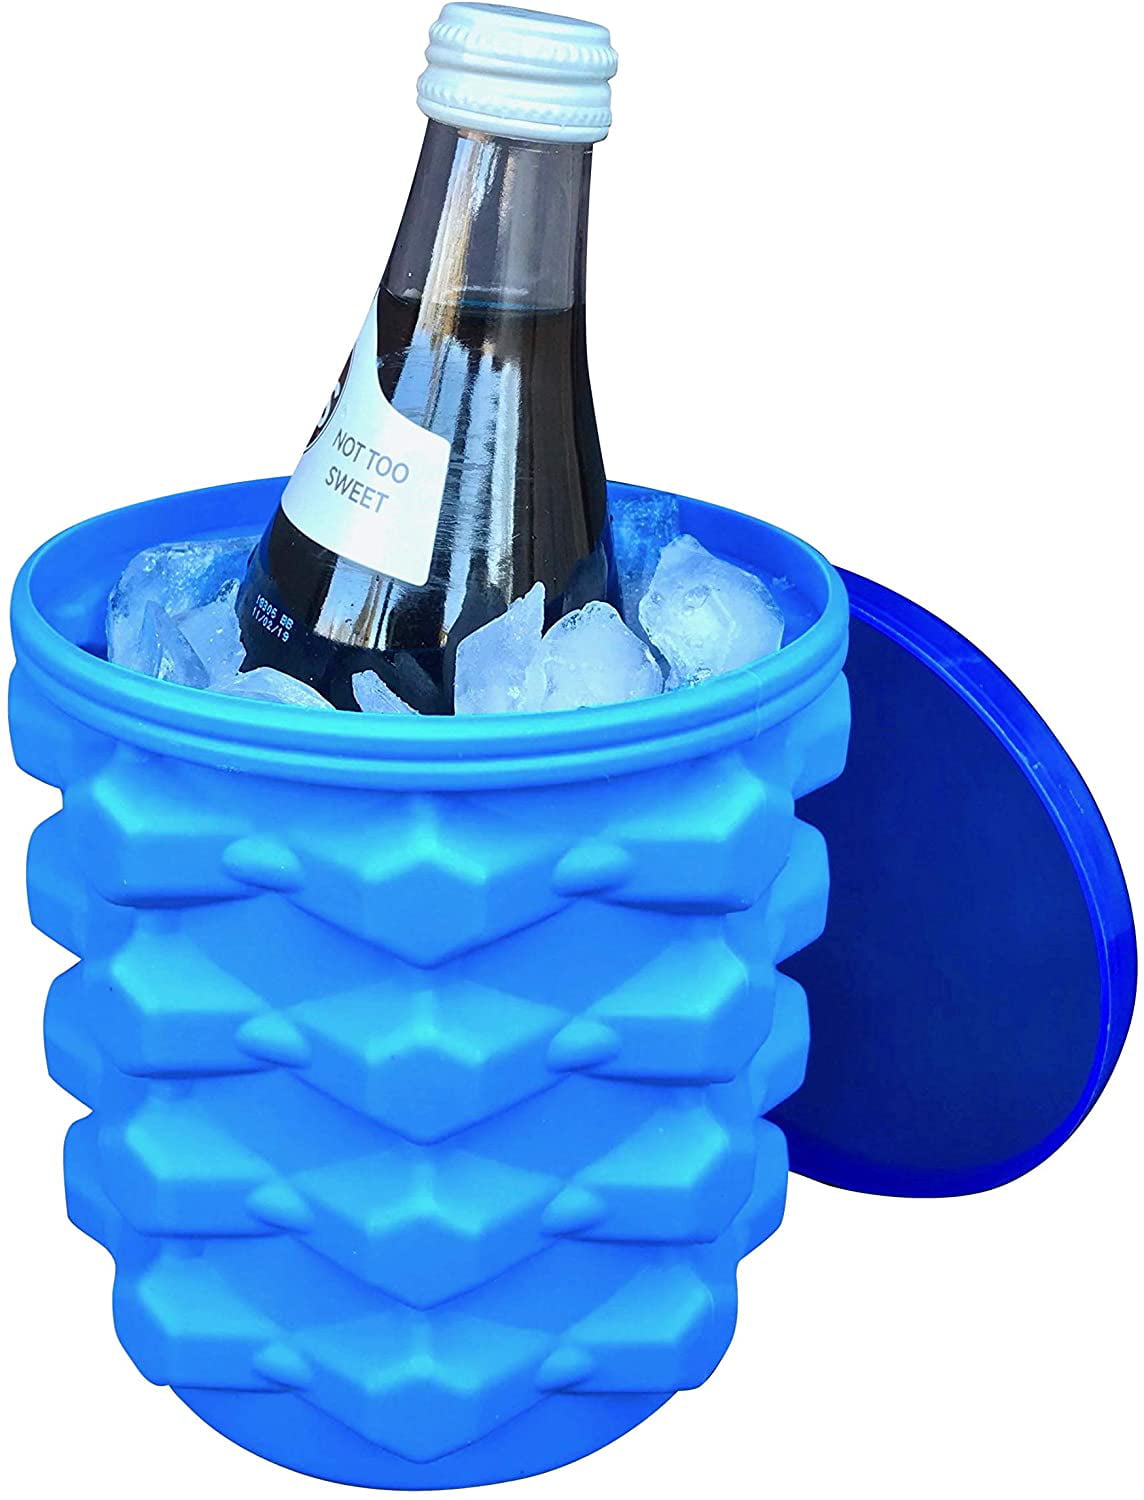 Voxxil 1 l Silicone, Plastic Vii®-471-Jm-Bucket With Lid Makes